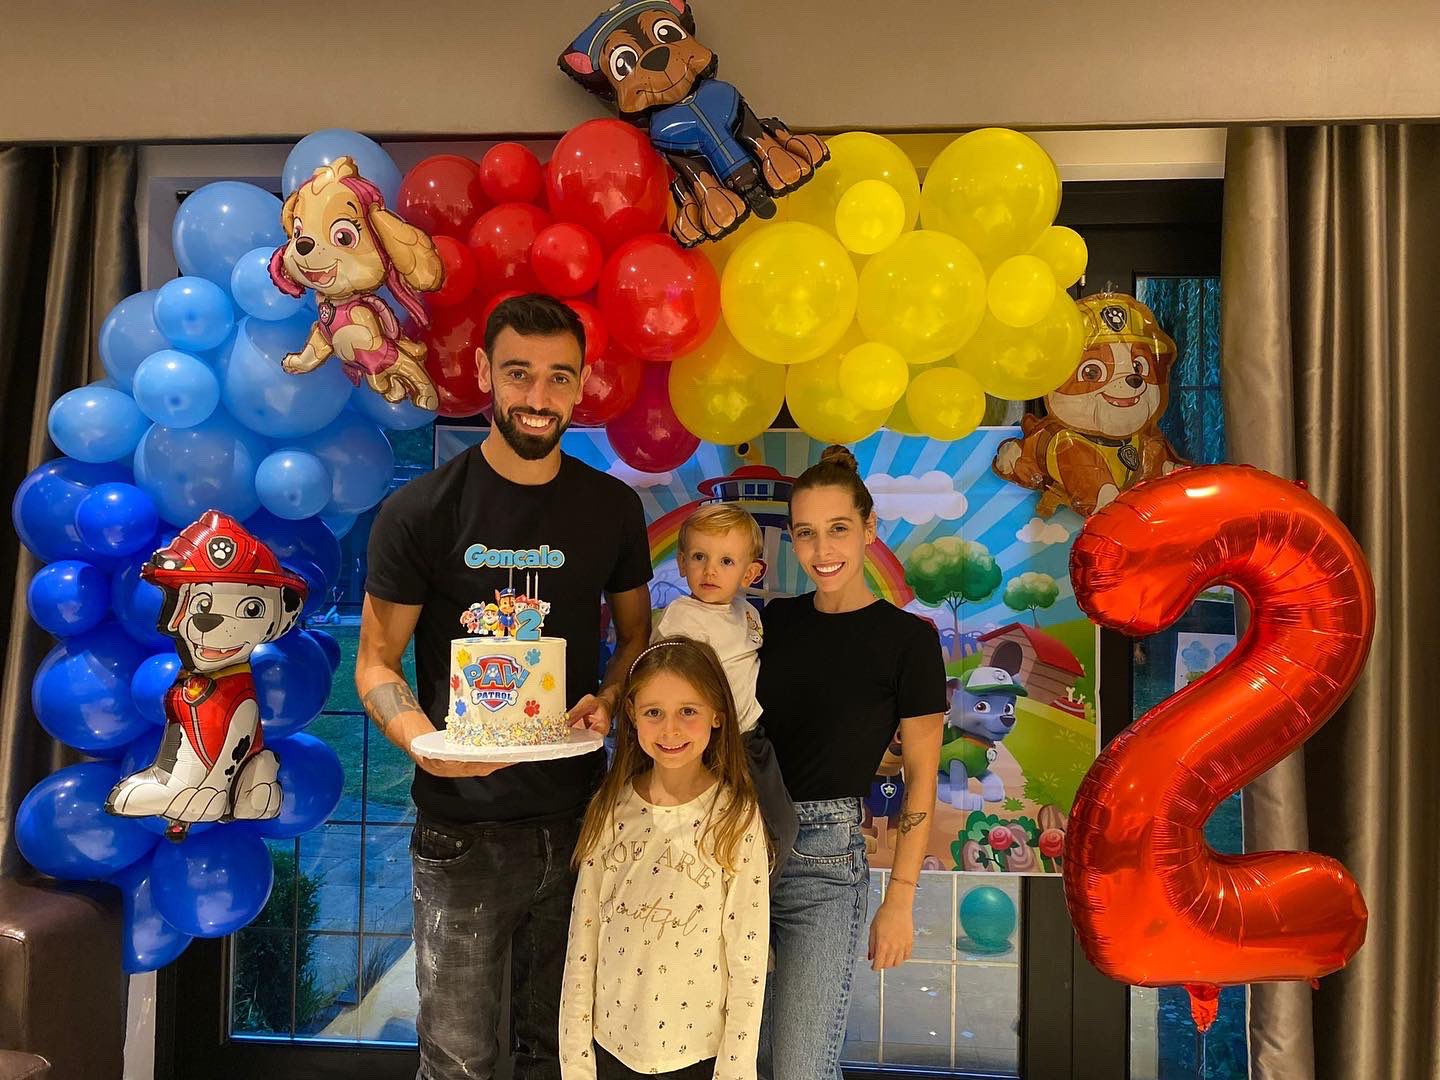 Bruno Fernandes on X: "Gonçalo is turning 2. Great day celebrating his  birthday together ❤️ https://t.co/FqkzlNSDxh" / X